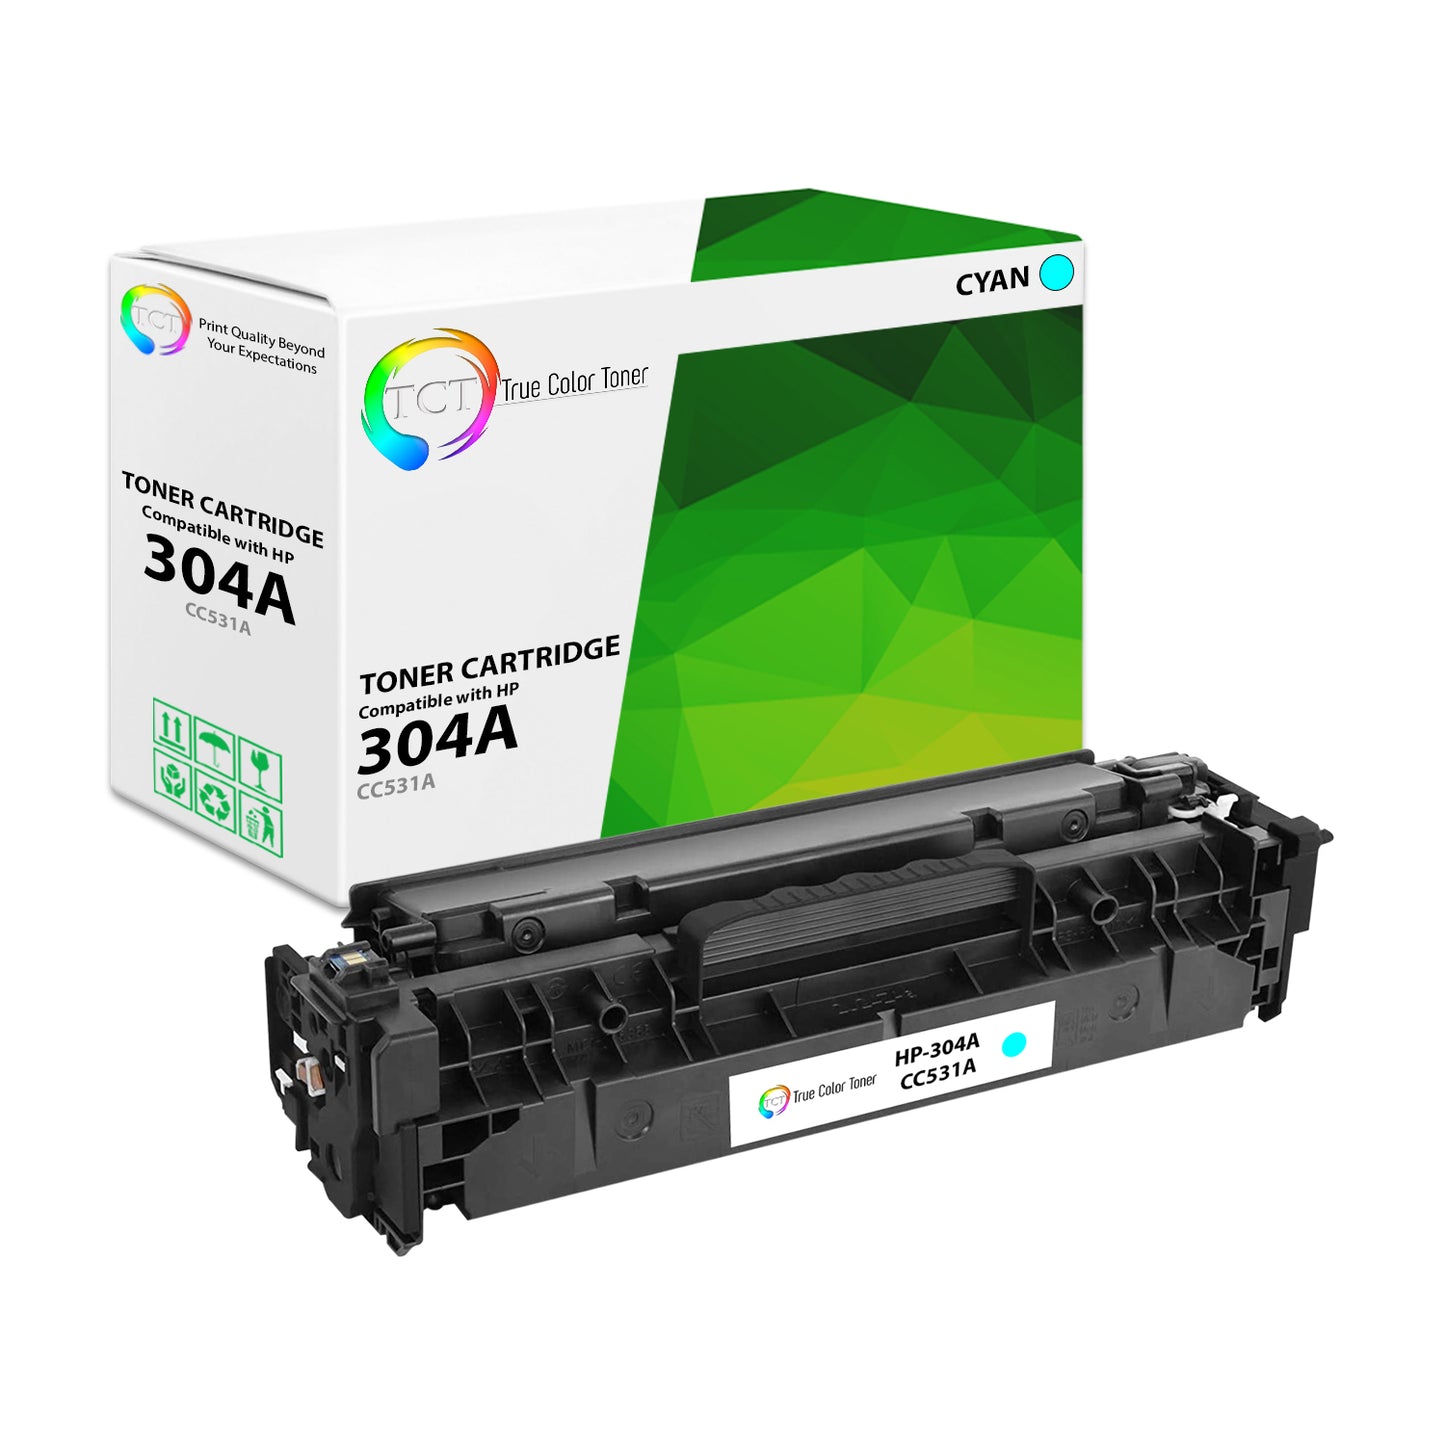 TCT Compatible Toner Cartridge Replacement for the HP 304A Series - 1 Pack Cyan